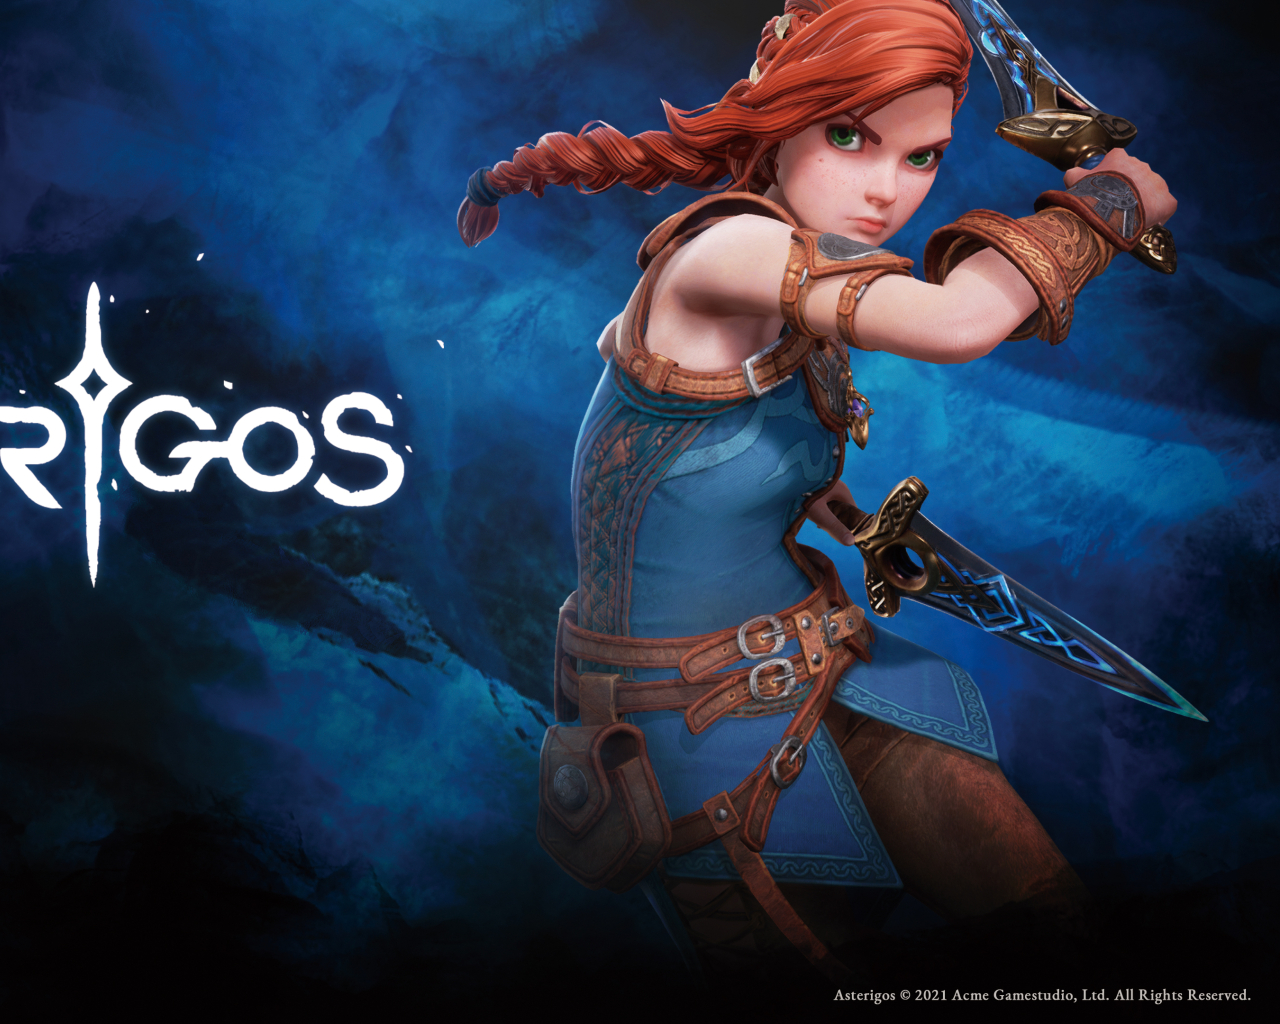 Asterigos: Curse of the Stars instal the new version for windows